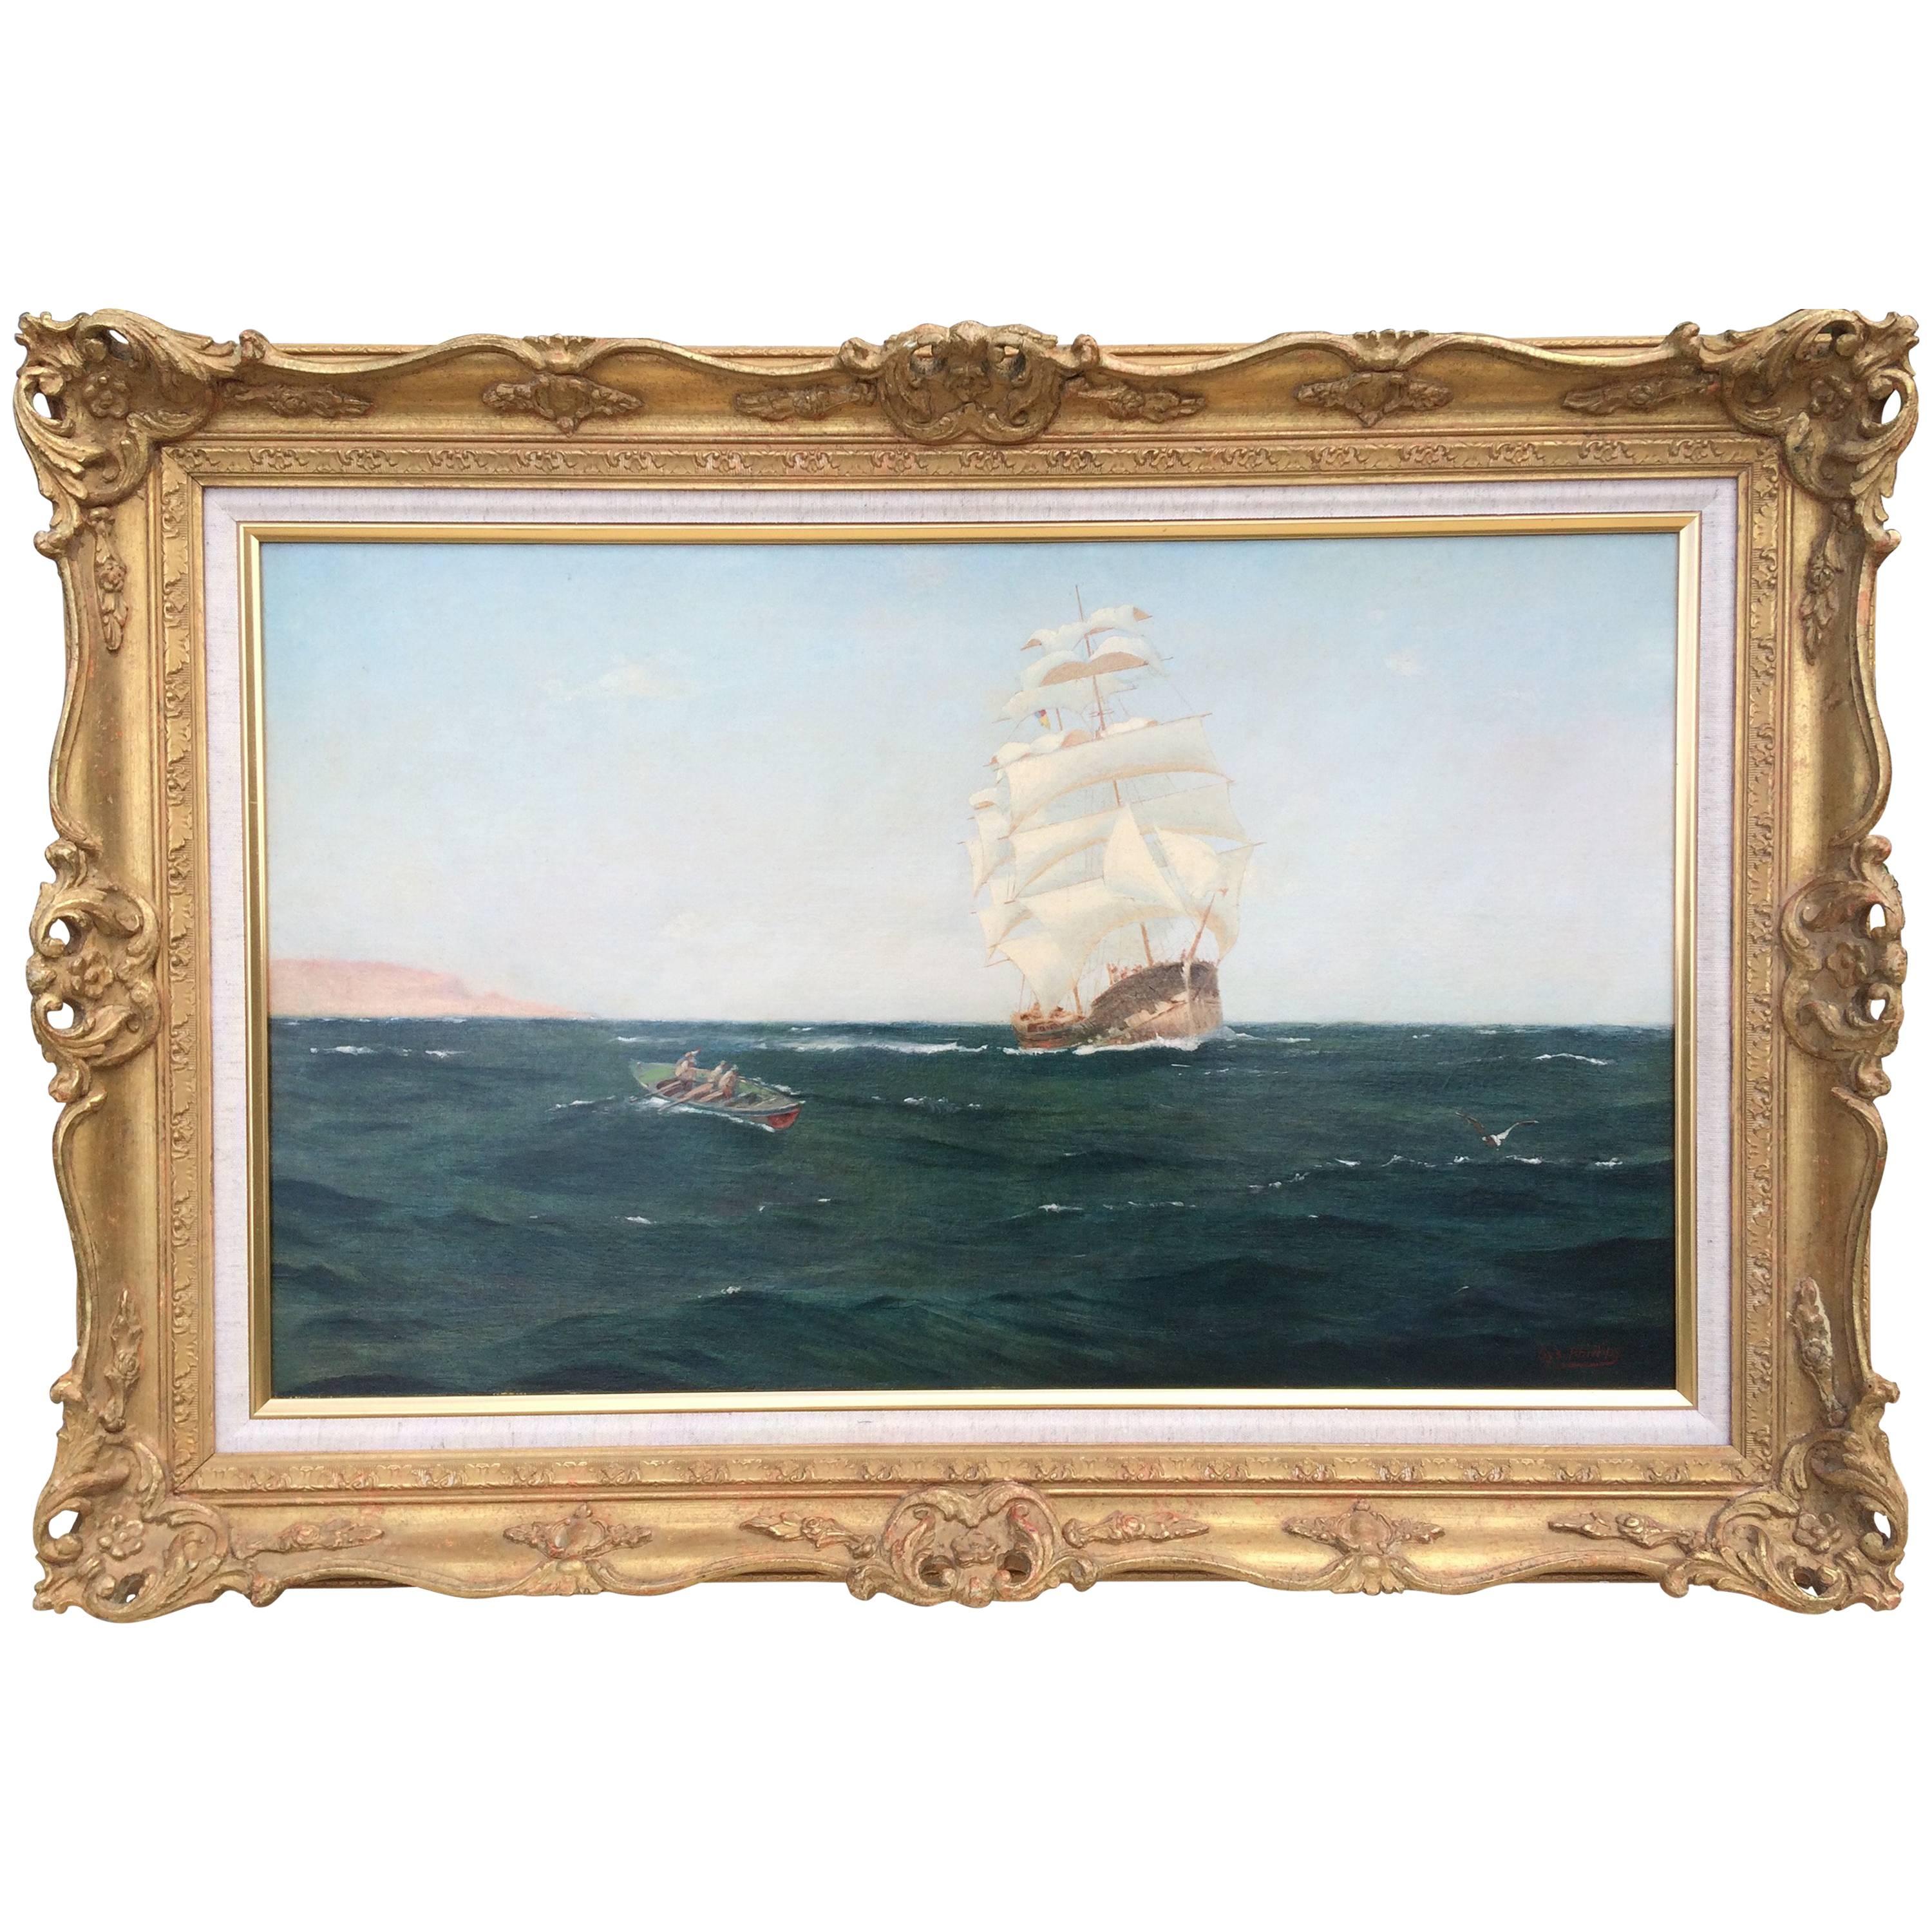 "Going Ashore" by Sydney Phillips, 19th Century British Marine Painting For Sale